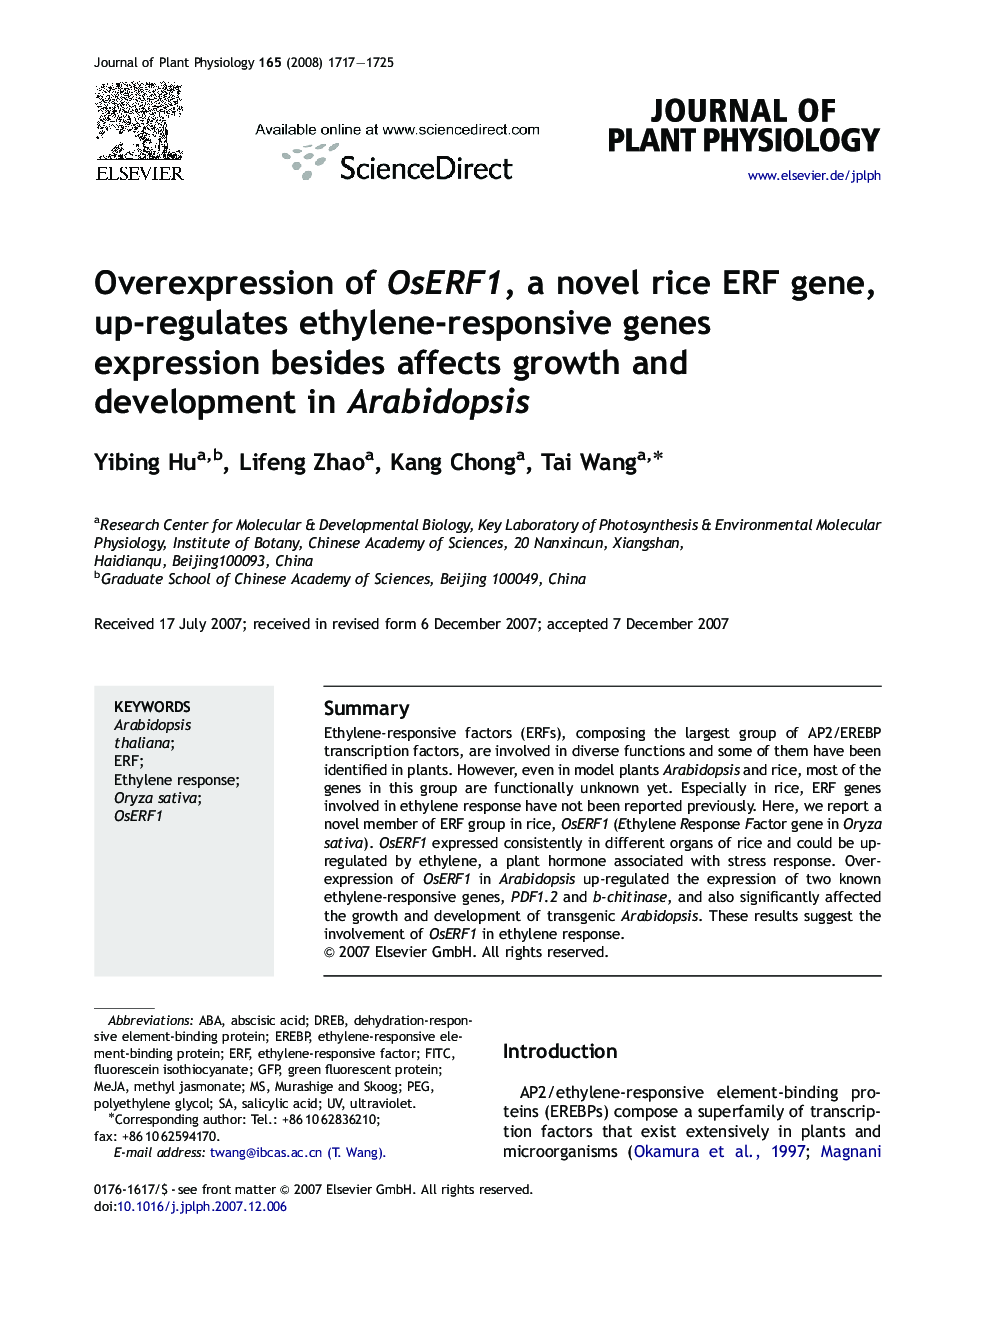 Overexpression of OsERF1, a novel rice ERF gene, up-regulates ethylene-responsive genes expression besides affects growth and development in Arabidopsis